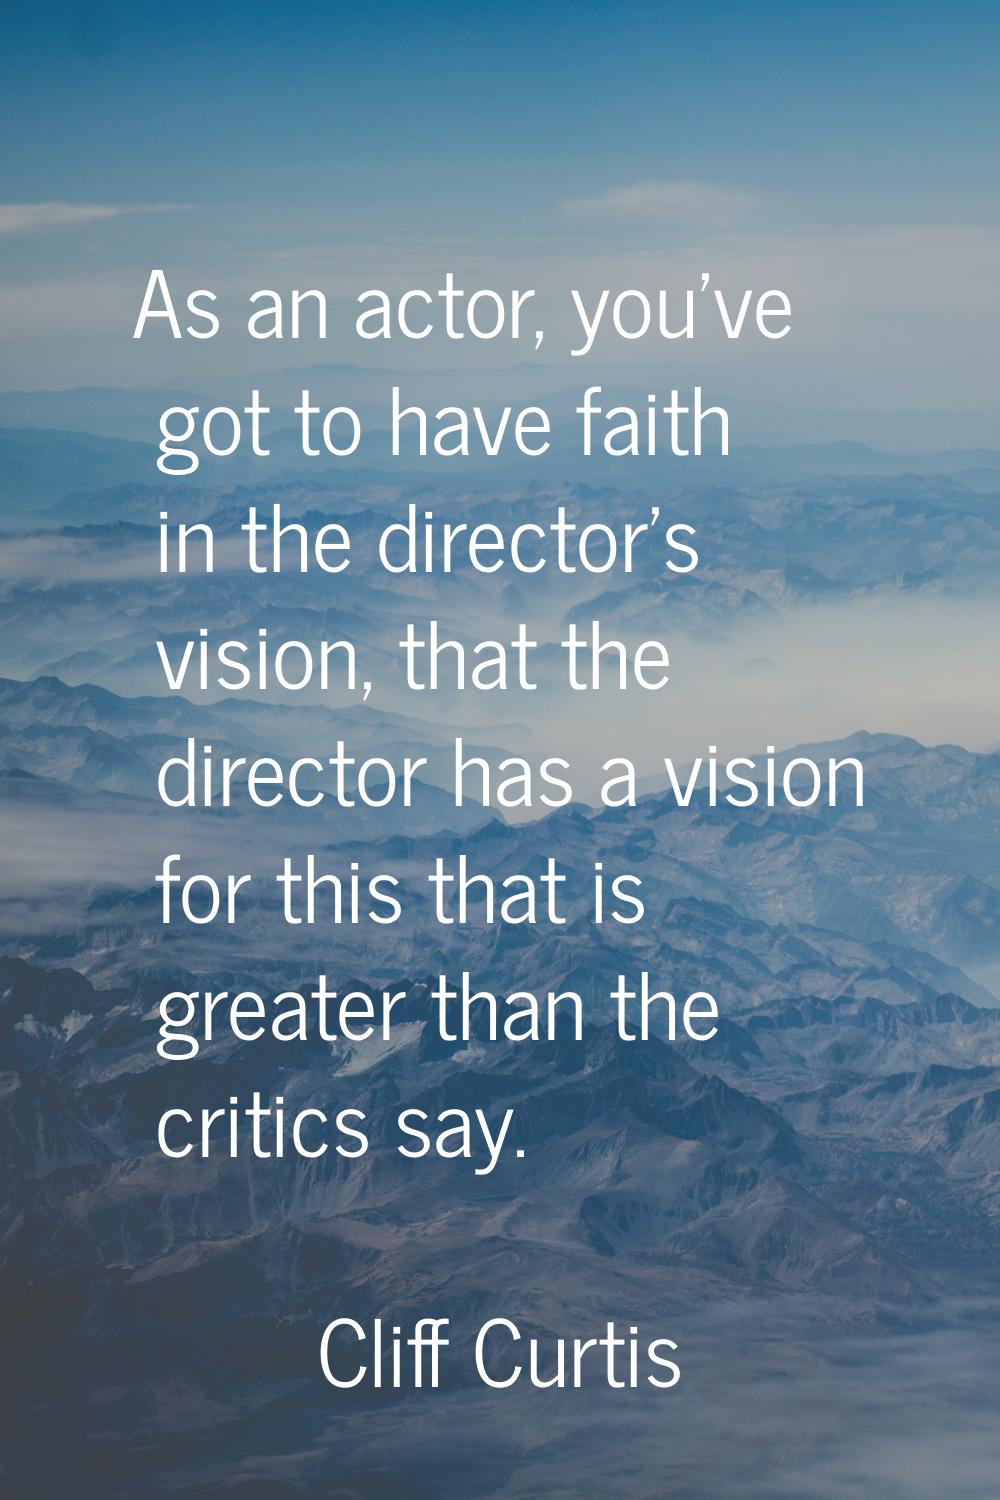 As an actor, you've got to have faith in the director's vision, that the director has a vision for 